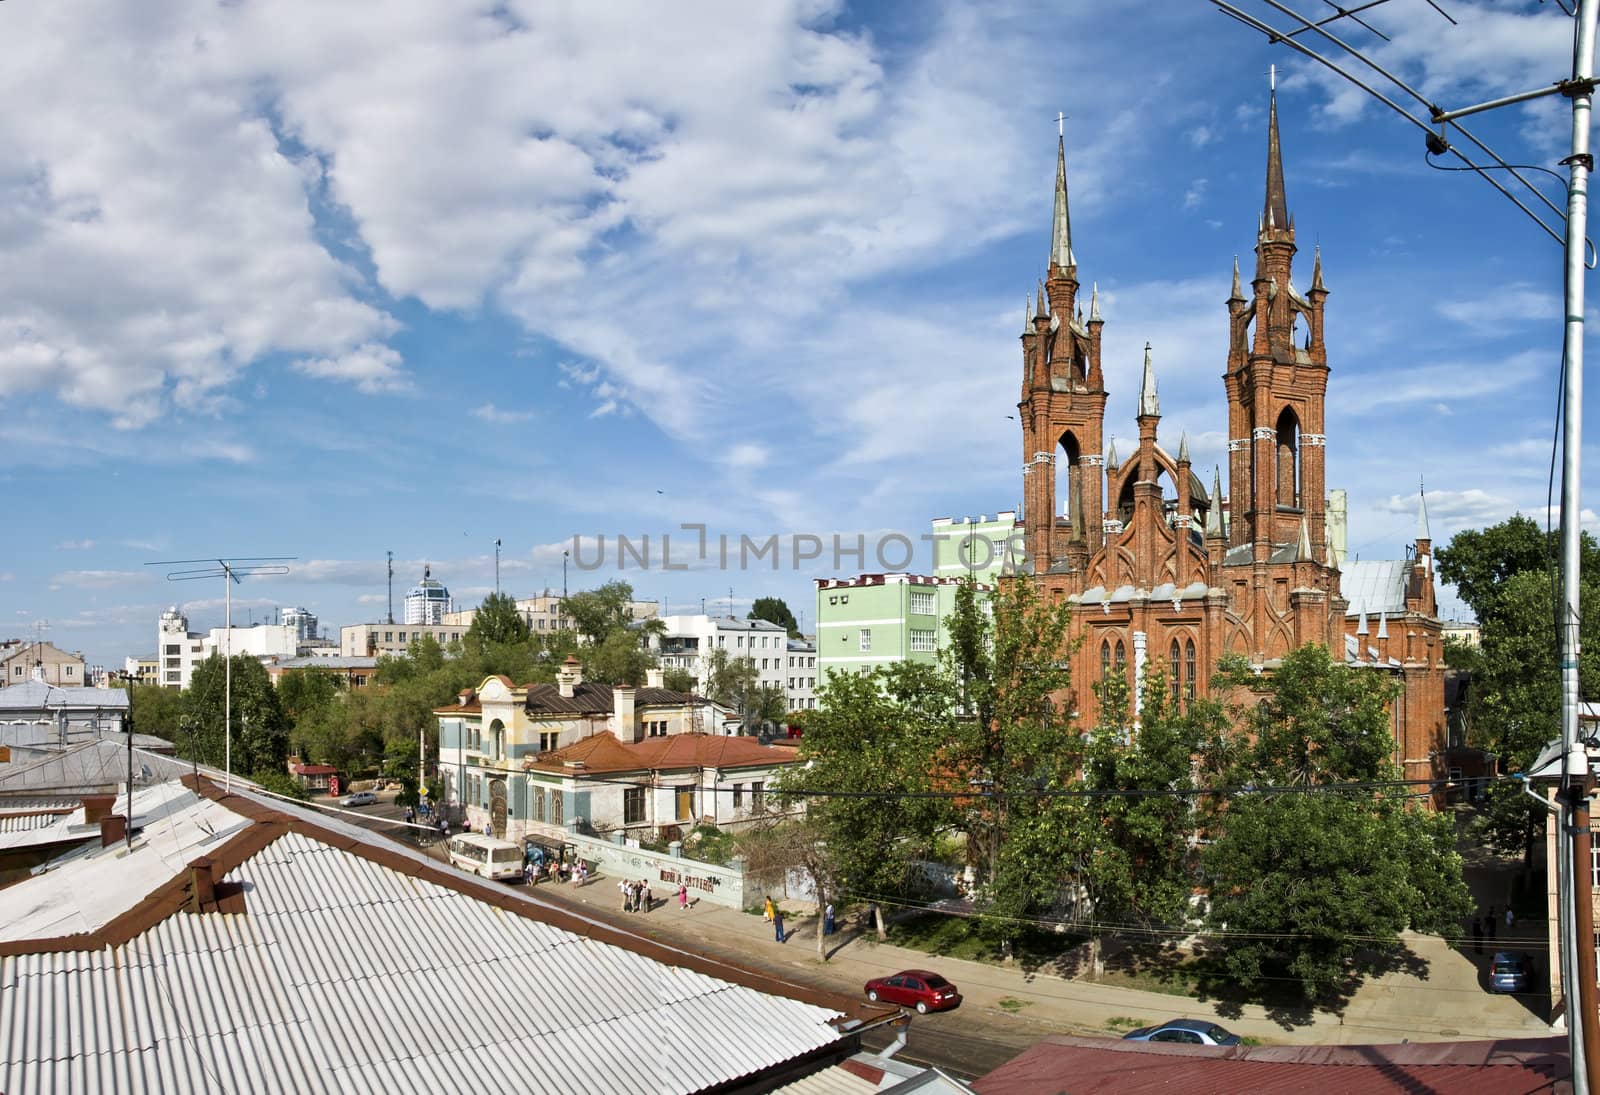 Panorama of large size. Urban Catholic cathedral in the heart of the city of Samara. Russia. Against the background of blue sky with clouds. Taken from the roof of a house.